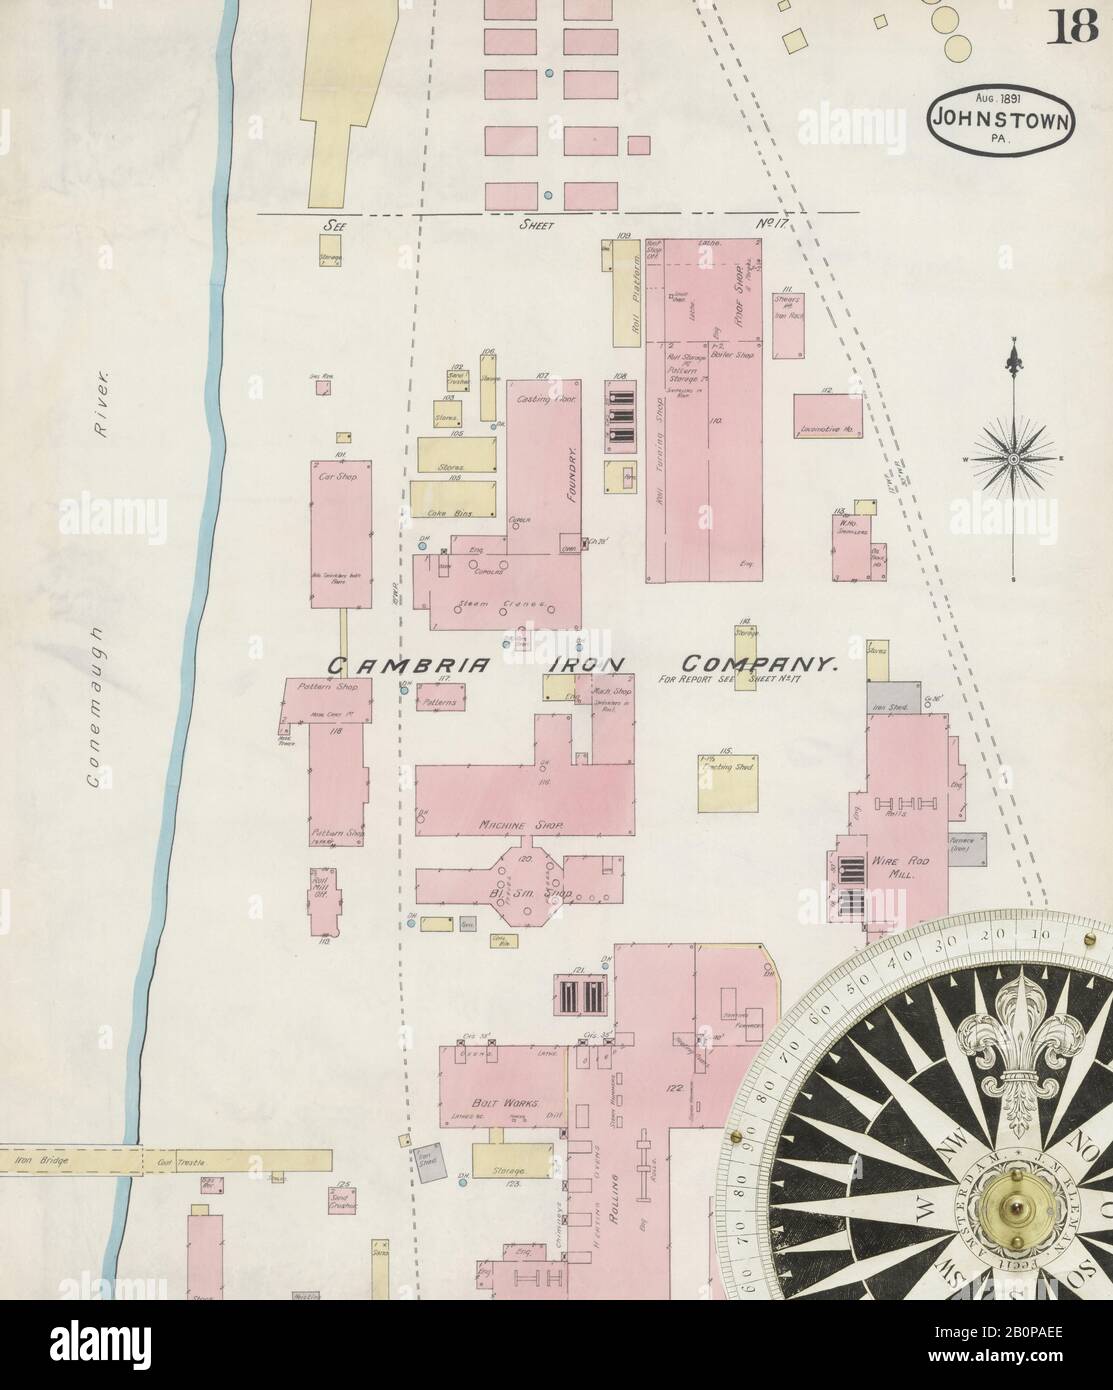 Image 18 of Sanborn Fire Insurance Map from Johnstown, Cambria County, Pennsylvania. Aug 1891. 21 Sheet(s), America, street map with a Nineteenth Century compass Stock Photo